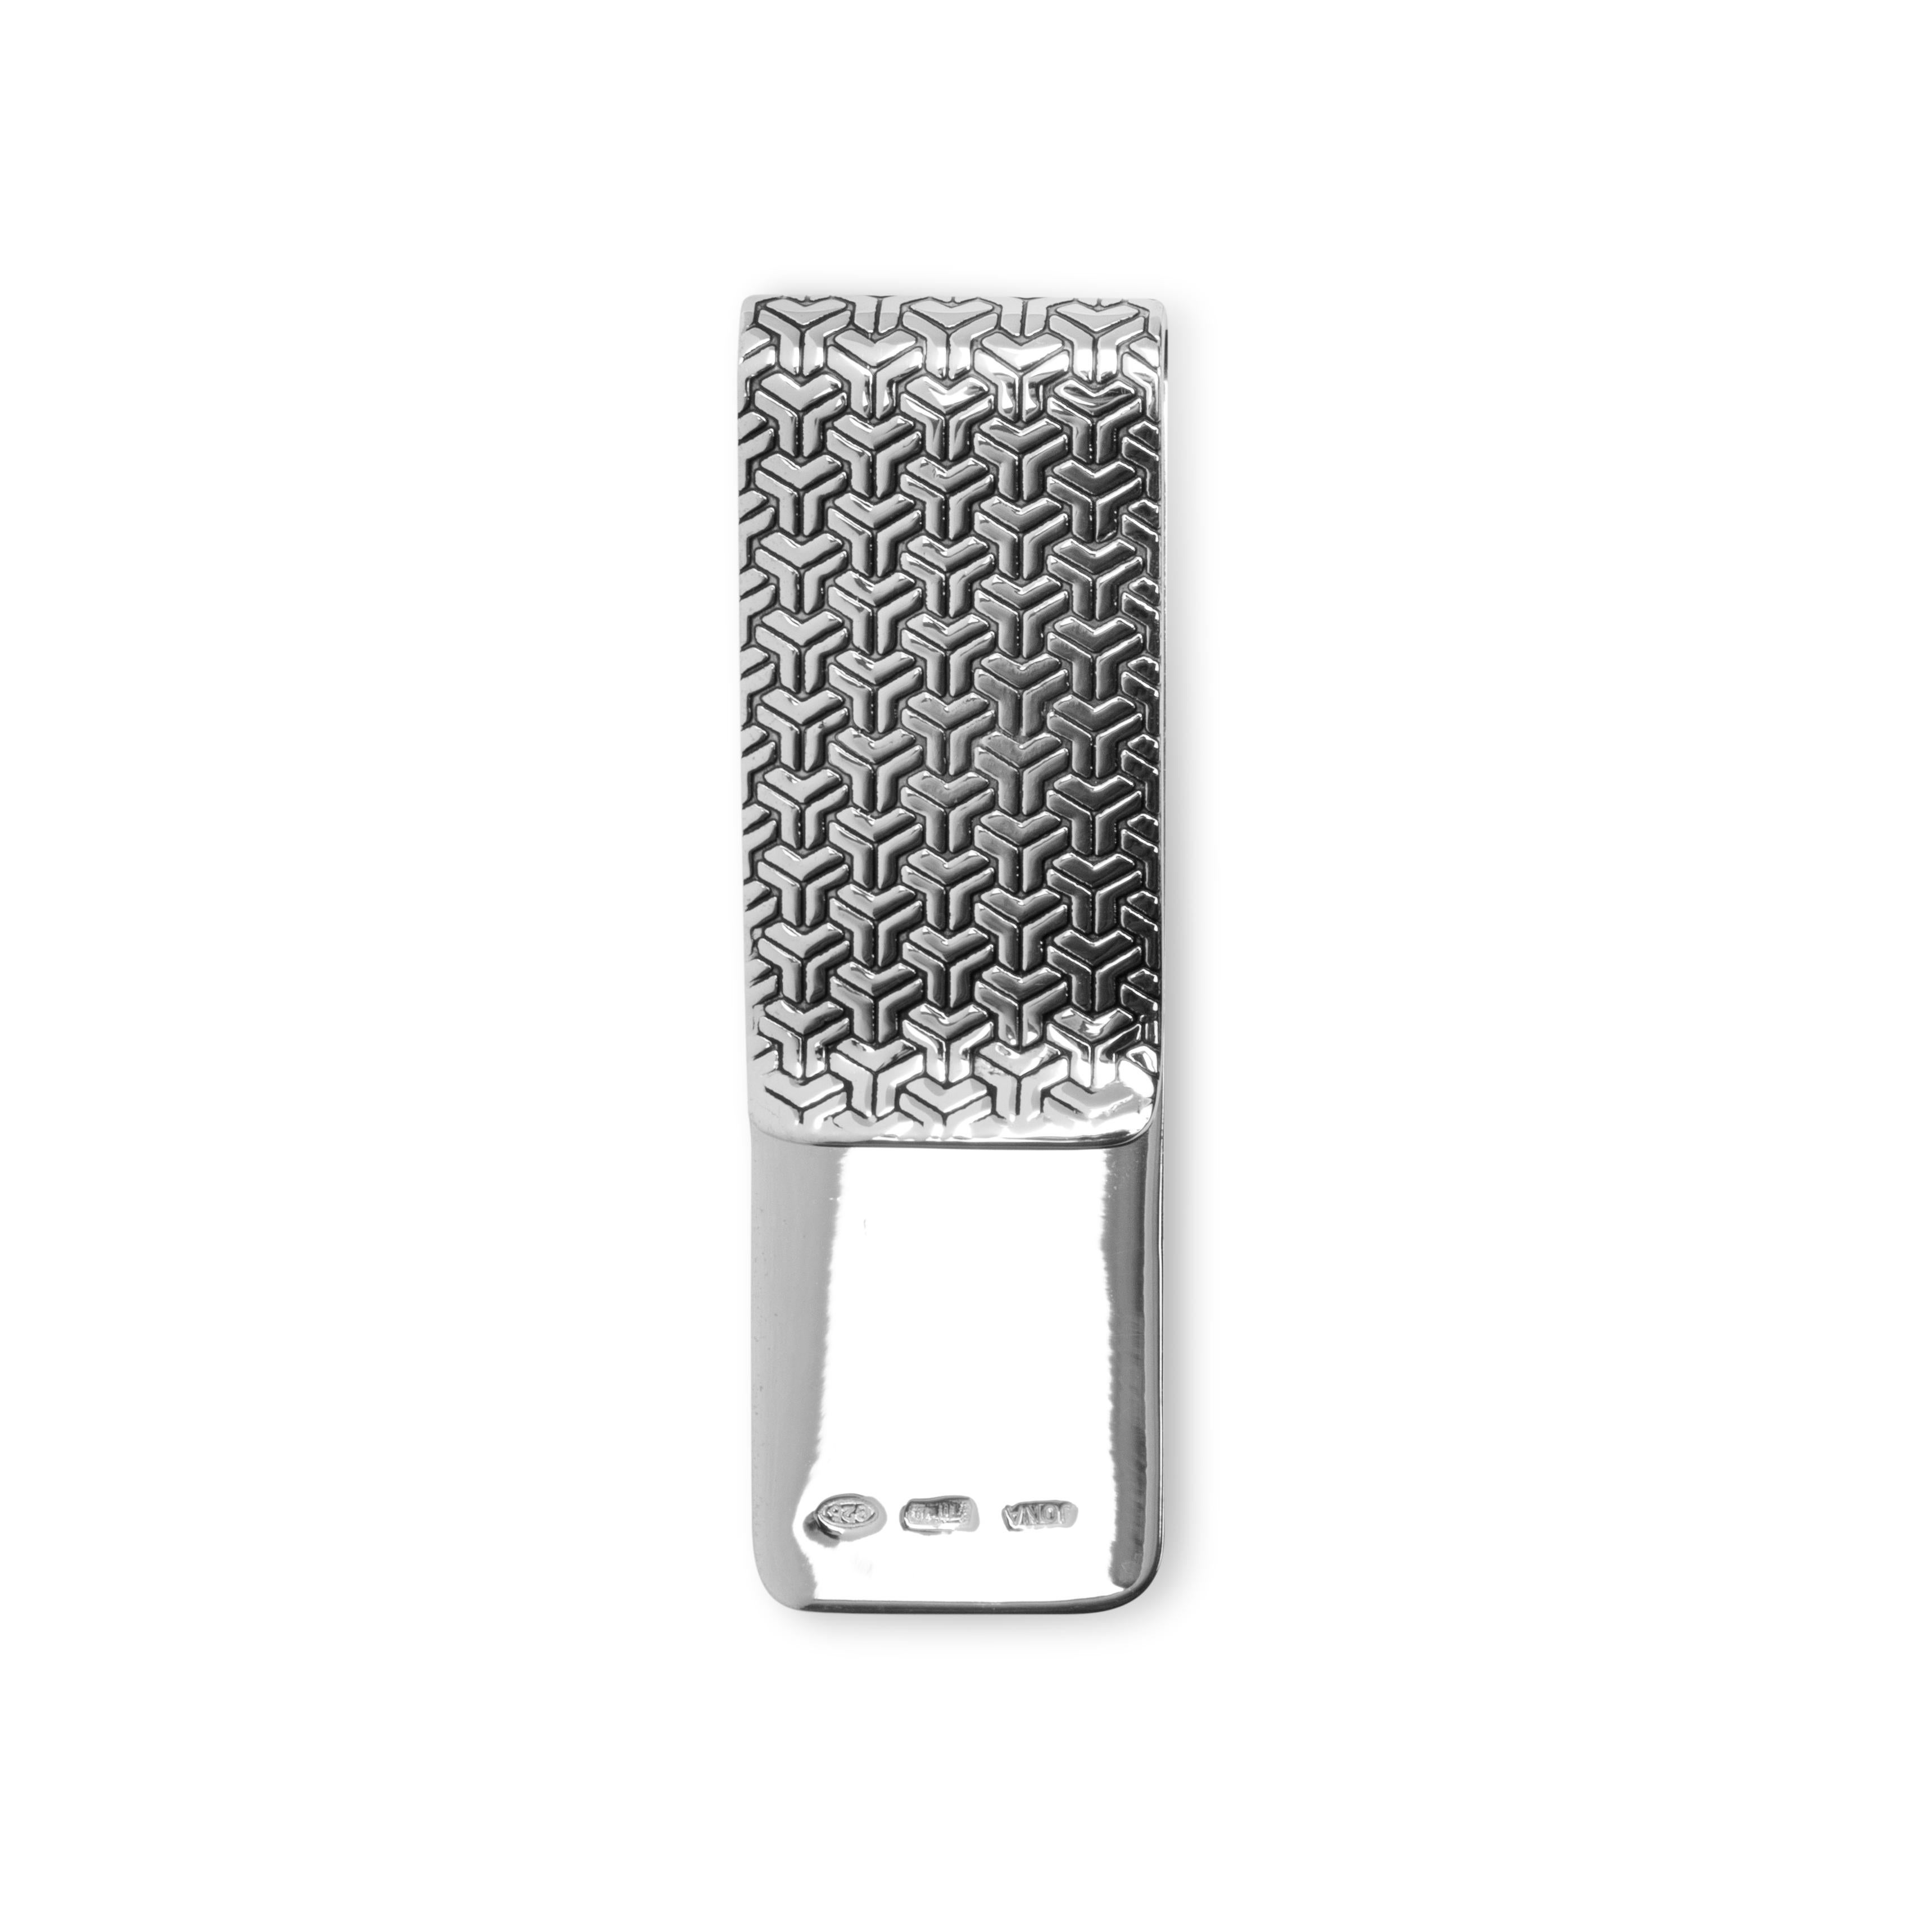 Alex Jona hand crafted in Italy, sterling silver money clip.
Alex Jona gifts stand out, not only for their special design and for the excellent quality, but also for the careful attention given to details during all the manufacturing process. Alex's